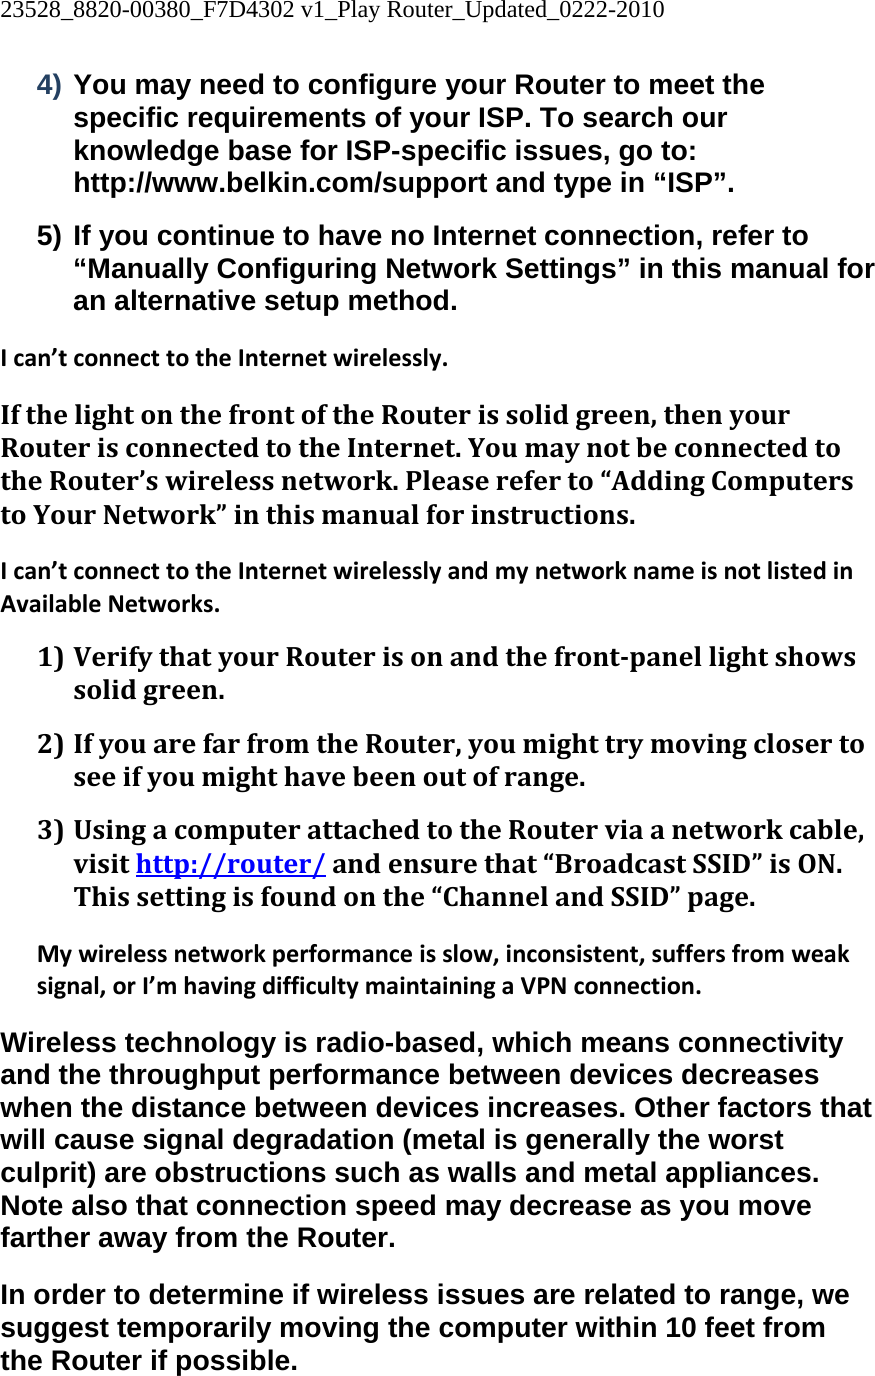 23528_8820-00380_F7D4302 v1_Play Router_Updated_0222-2010  4) You may need to configure your Router to meet the specific requirements of your ISP. To search our knowledge base for ISP-specific issues, go to: http://www.belkin.com/support and type in “ISP”. 5) If you continue to have no Internet connection, refer to “Manually Configuring Network Settings” in this manual for an alternative setup method. Ican’tconnecttotheInternetwirelessly.IfthelightonthefrontoftheRouterissolidgreen,thenyourRouterisconnectedtotheInternet.YoumaynotbeconnectedtotheRouter’swirelessnetwork.Pleasereferto“AddingComputerstoYourNetwork”inthismanualforinstructions.Ican’tconnecttotheInternetwirelesslyandmynetworknameisnotlistedinAvailableNetworks.1) VerifythatyourRouterisonandthefrontpanellightshowssolidgreen.2) IfyouarefarfromtheRouter,youmighttrymovingclosertoseeifyoumighthavebeenoutofrange.3) UsingacomputerattachedtotheRouterviaanetworkcable,visithttp://router/andensurethat“BroadcastSSID”isON.Thissettingisfoundonthe“ChannelandSSID”page.Mywirelessnetworkperformanceisslow,inconsistent,suffersfromweaksignal,orI’mhavingdifficultymaintainingaVPNconnection.Wireless technology is radio-based, which means connectivity and the throughput performance between devices decreases when the distance between devices increases. Other factors that will cause signal degradation (metal is generally the worst culprit) are obstructions such as walls and metal appliances. Note also that connection speed may decrease as you move farther away from the Router. In order to determine if wireless issues are related to range, we suggest temporarily moving the computer within 10 feet from the Router if possible. 